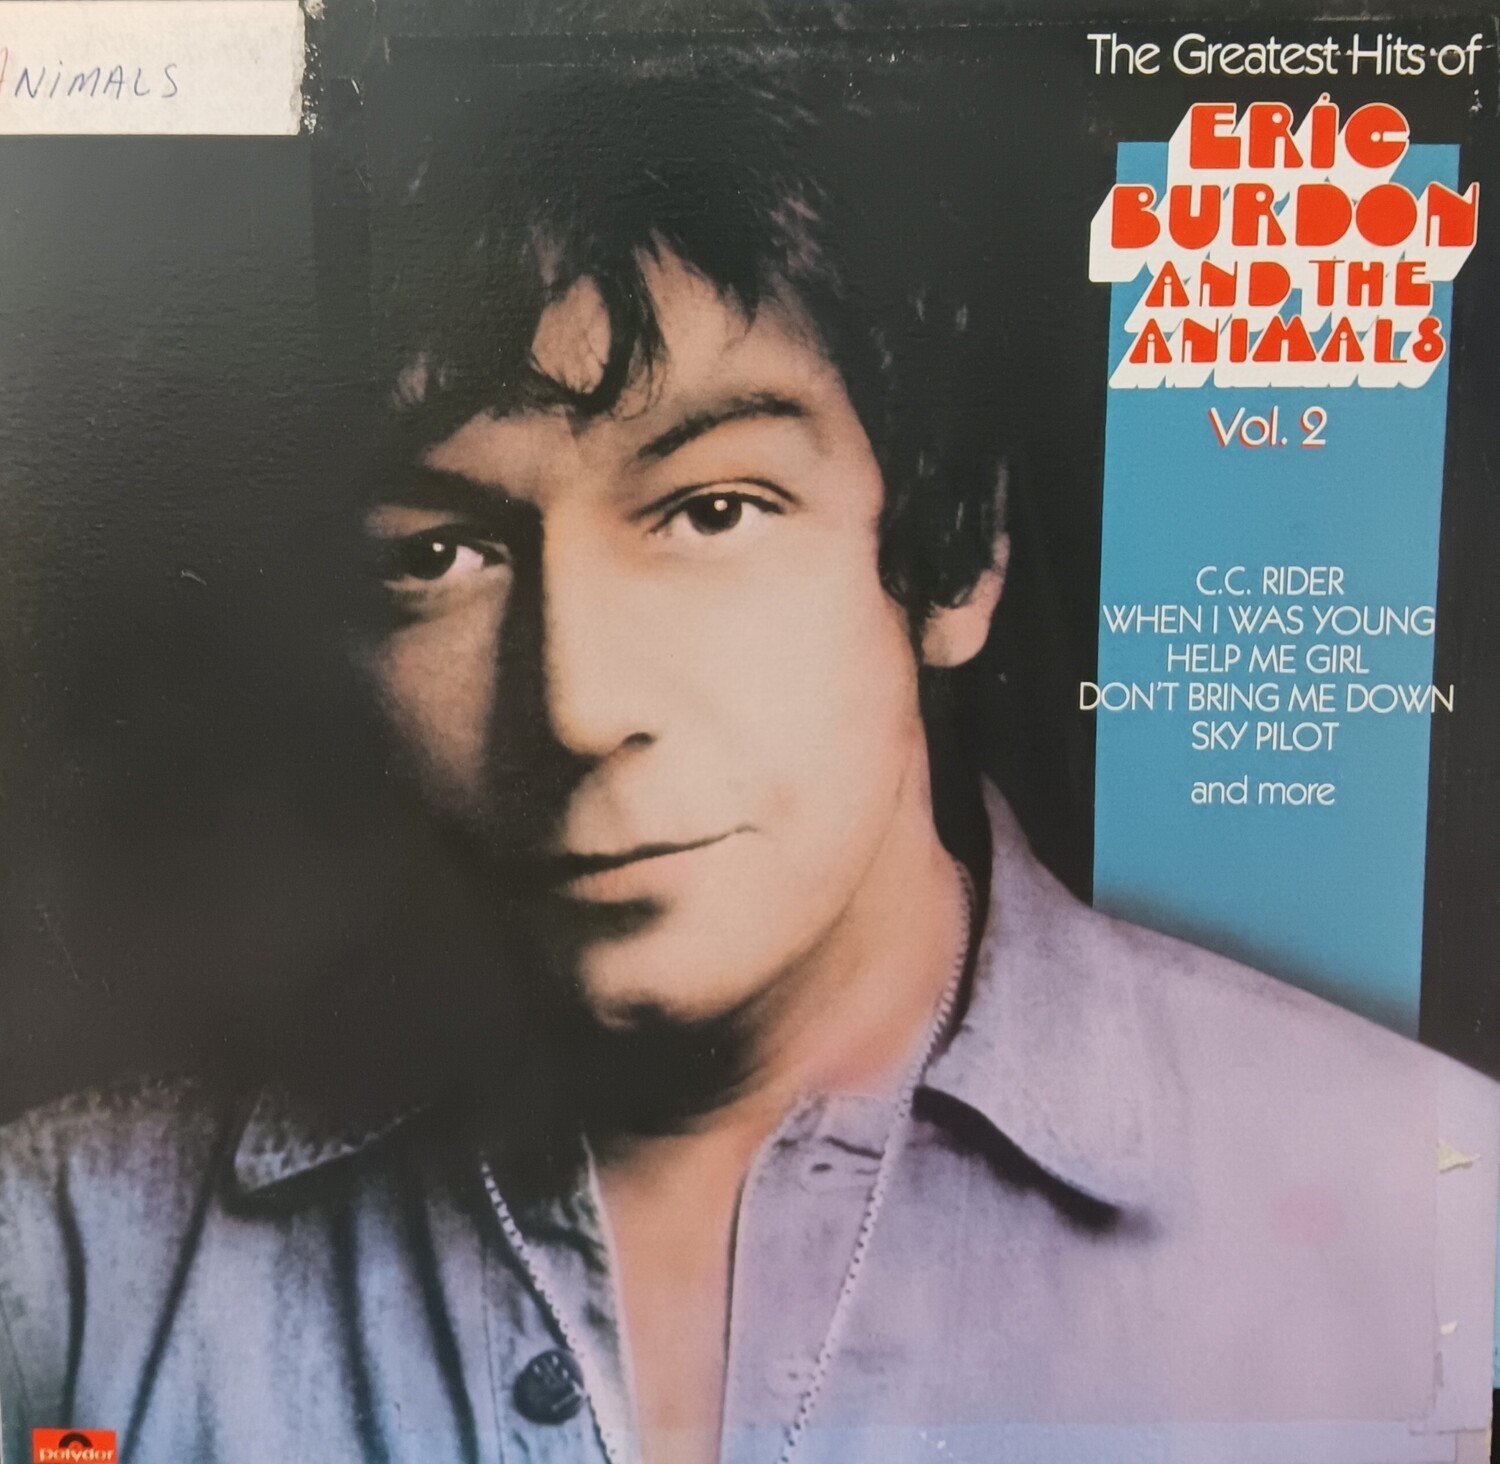 ERIC BURDON AND THE ANIMALS - The Greatest Hits of Eric Burdon and The Animals volume 2